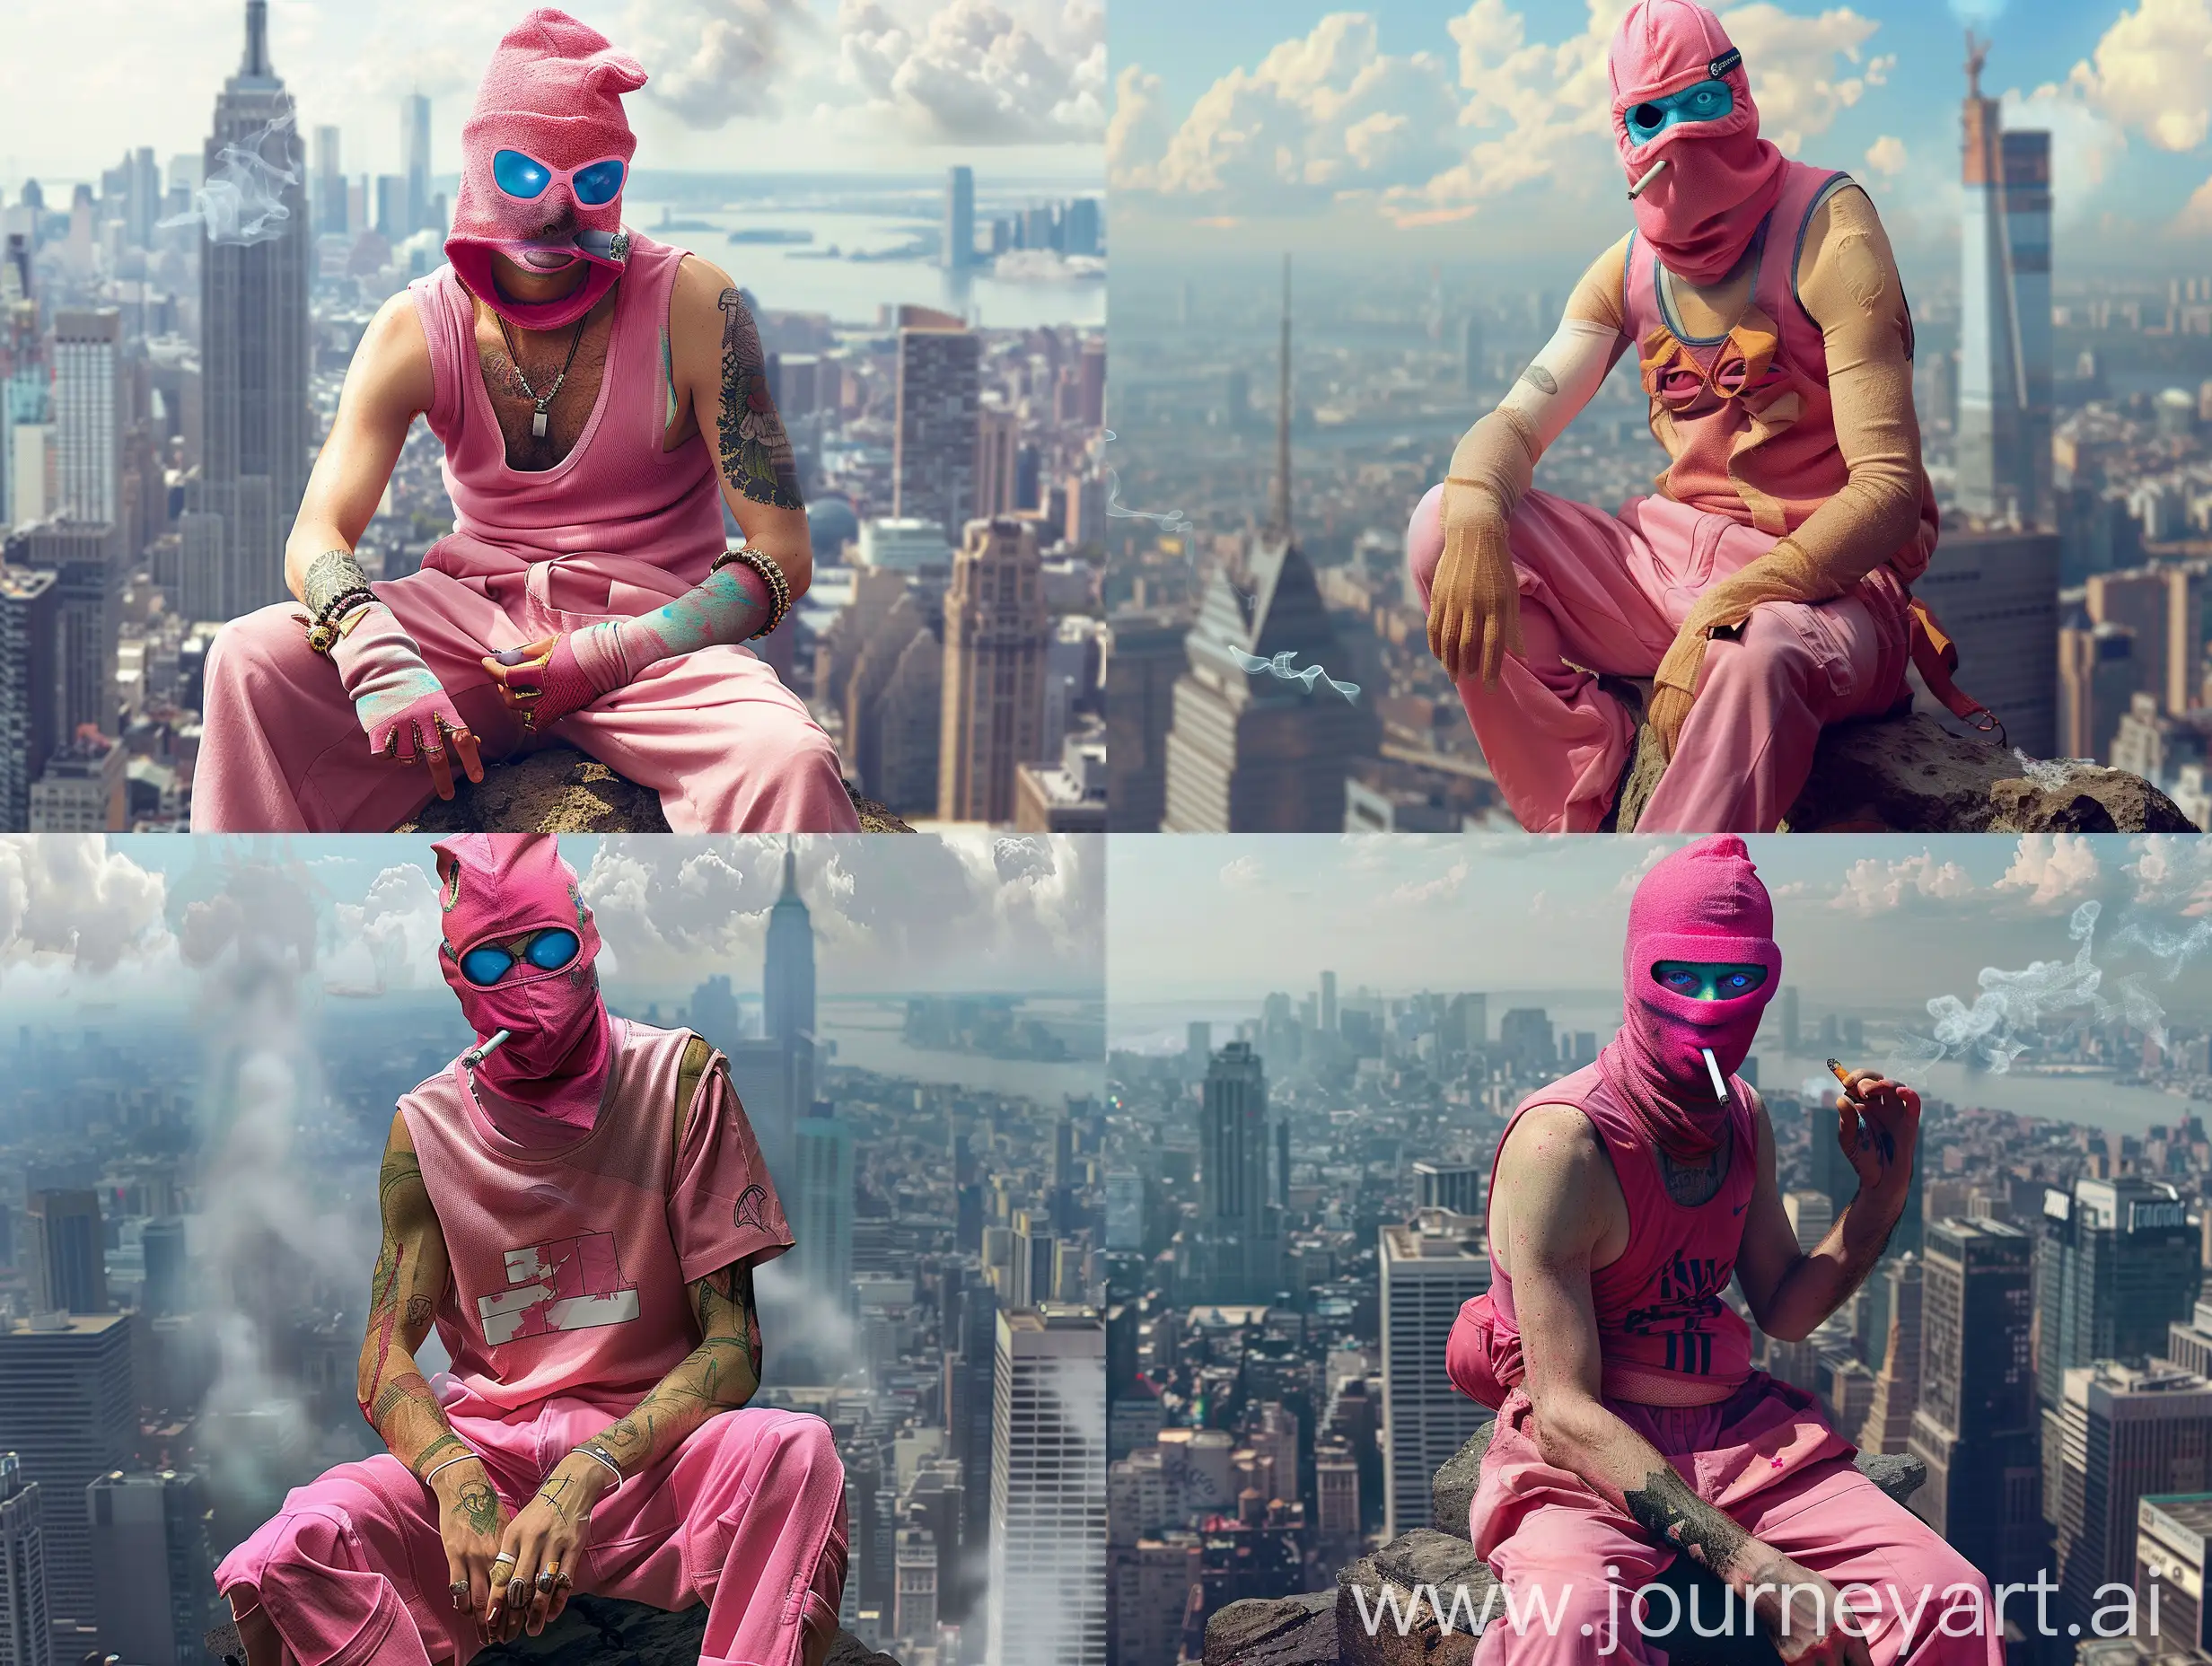 Urban-Contemplation-PinkClad-Man-on-Cliff-with-Unique-Eyes-and-Cigarette